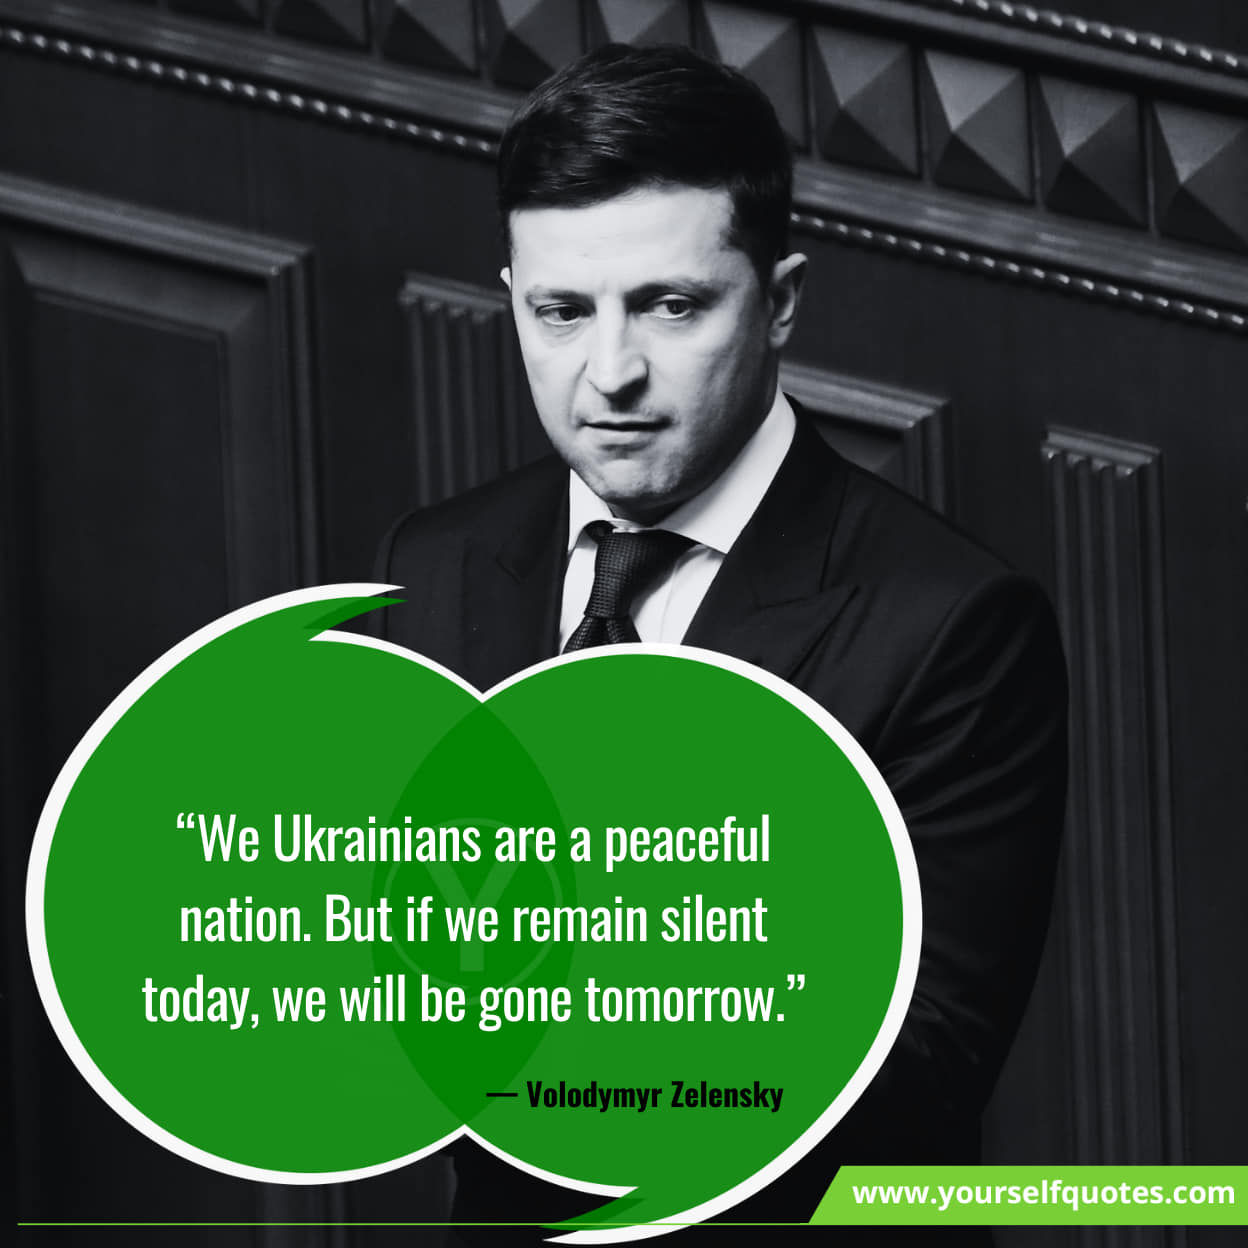 Inspirational Quotes By Volodymyr Zelensky 